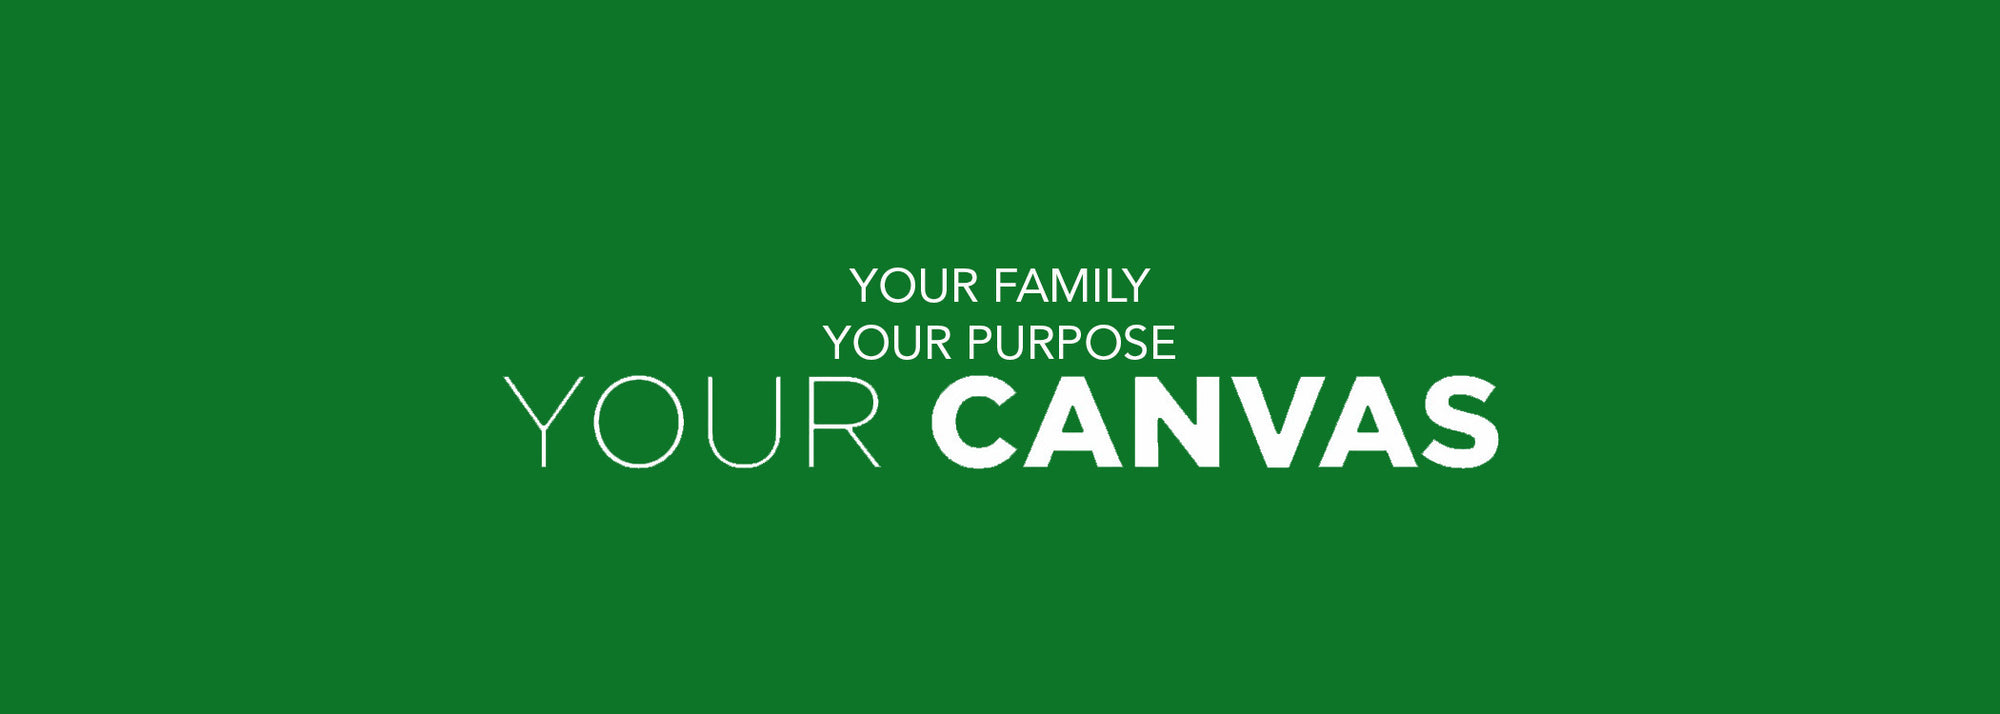 Your Canvas: Green